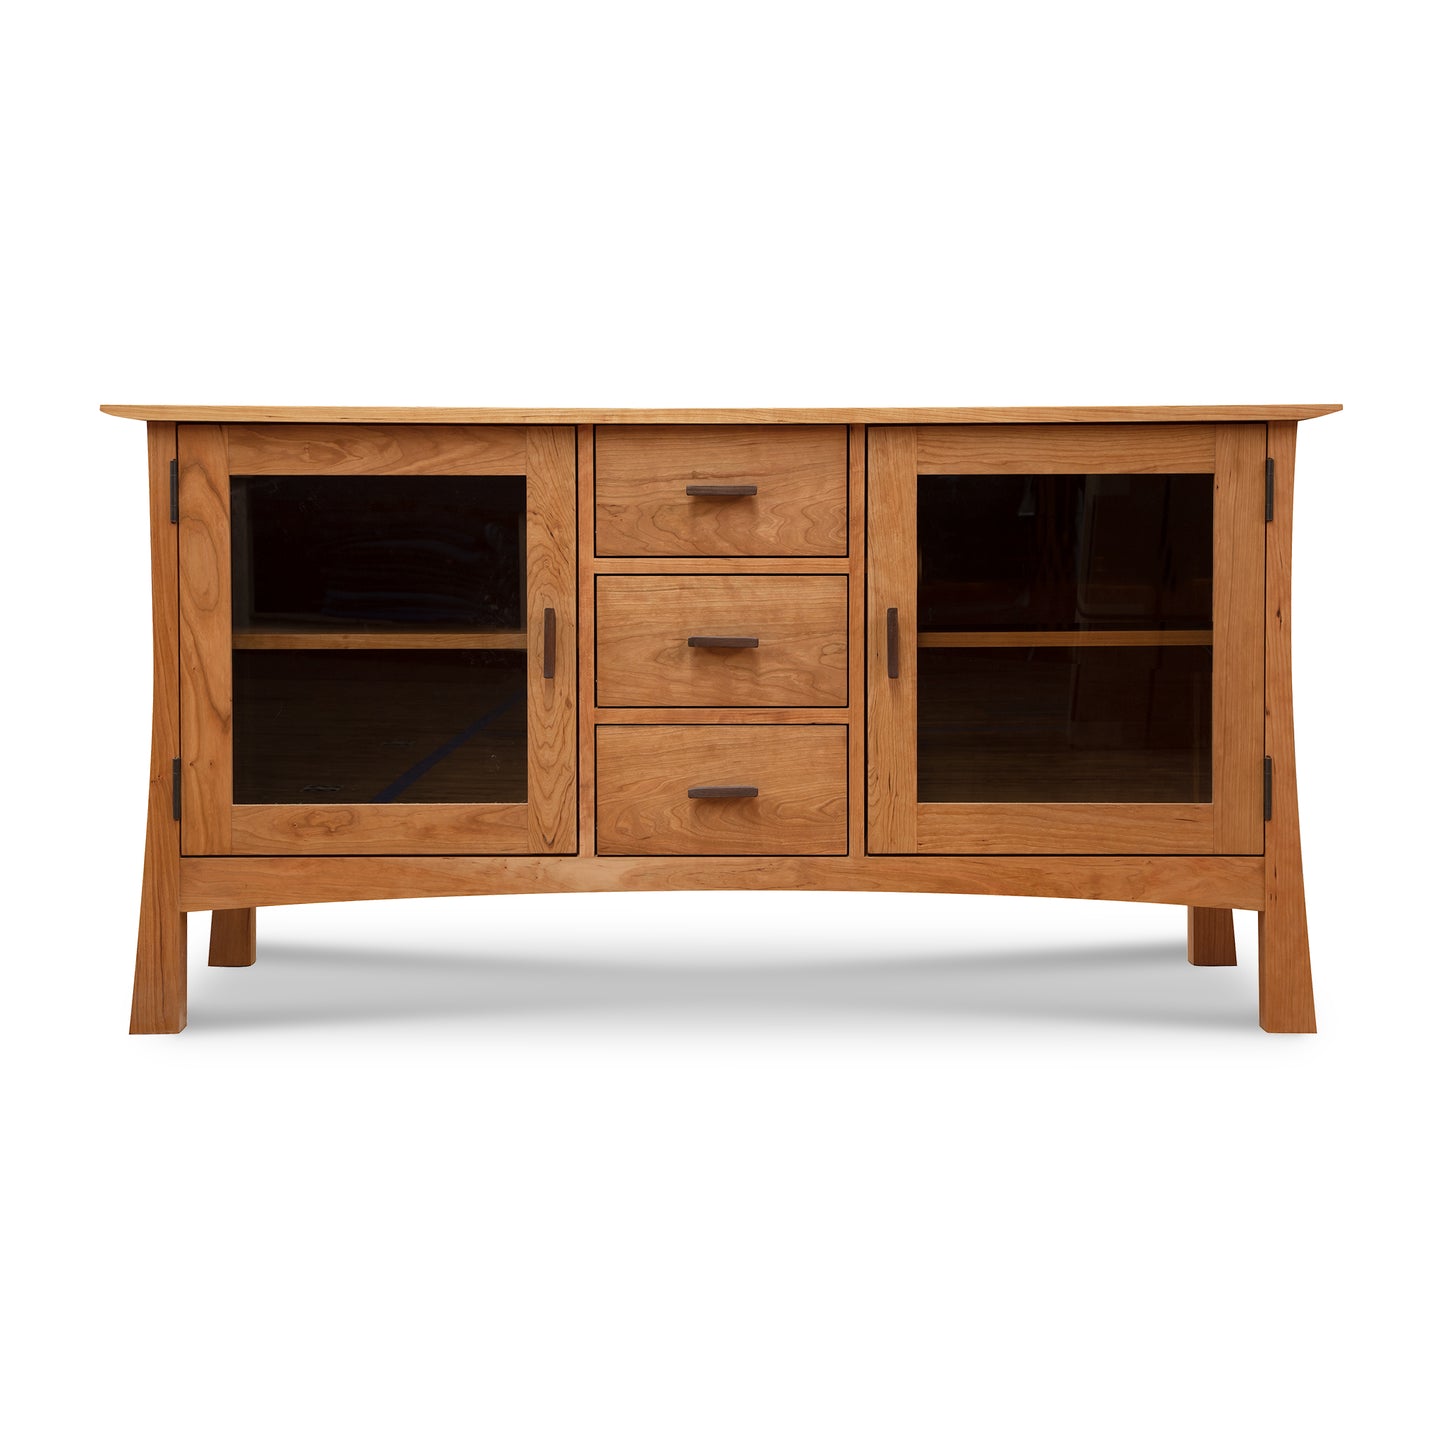 A Vermont Furniture Designs Contemporary Craftsman 3-Drawer Media Console with glass-paneled cabinets and drawers against a white background.